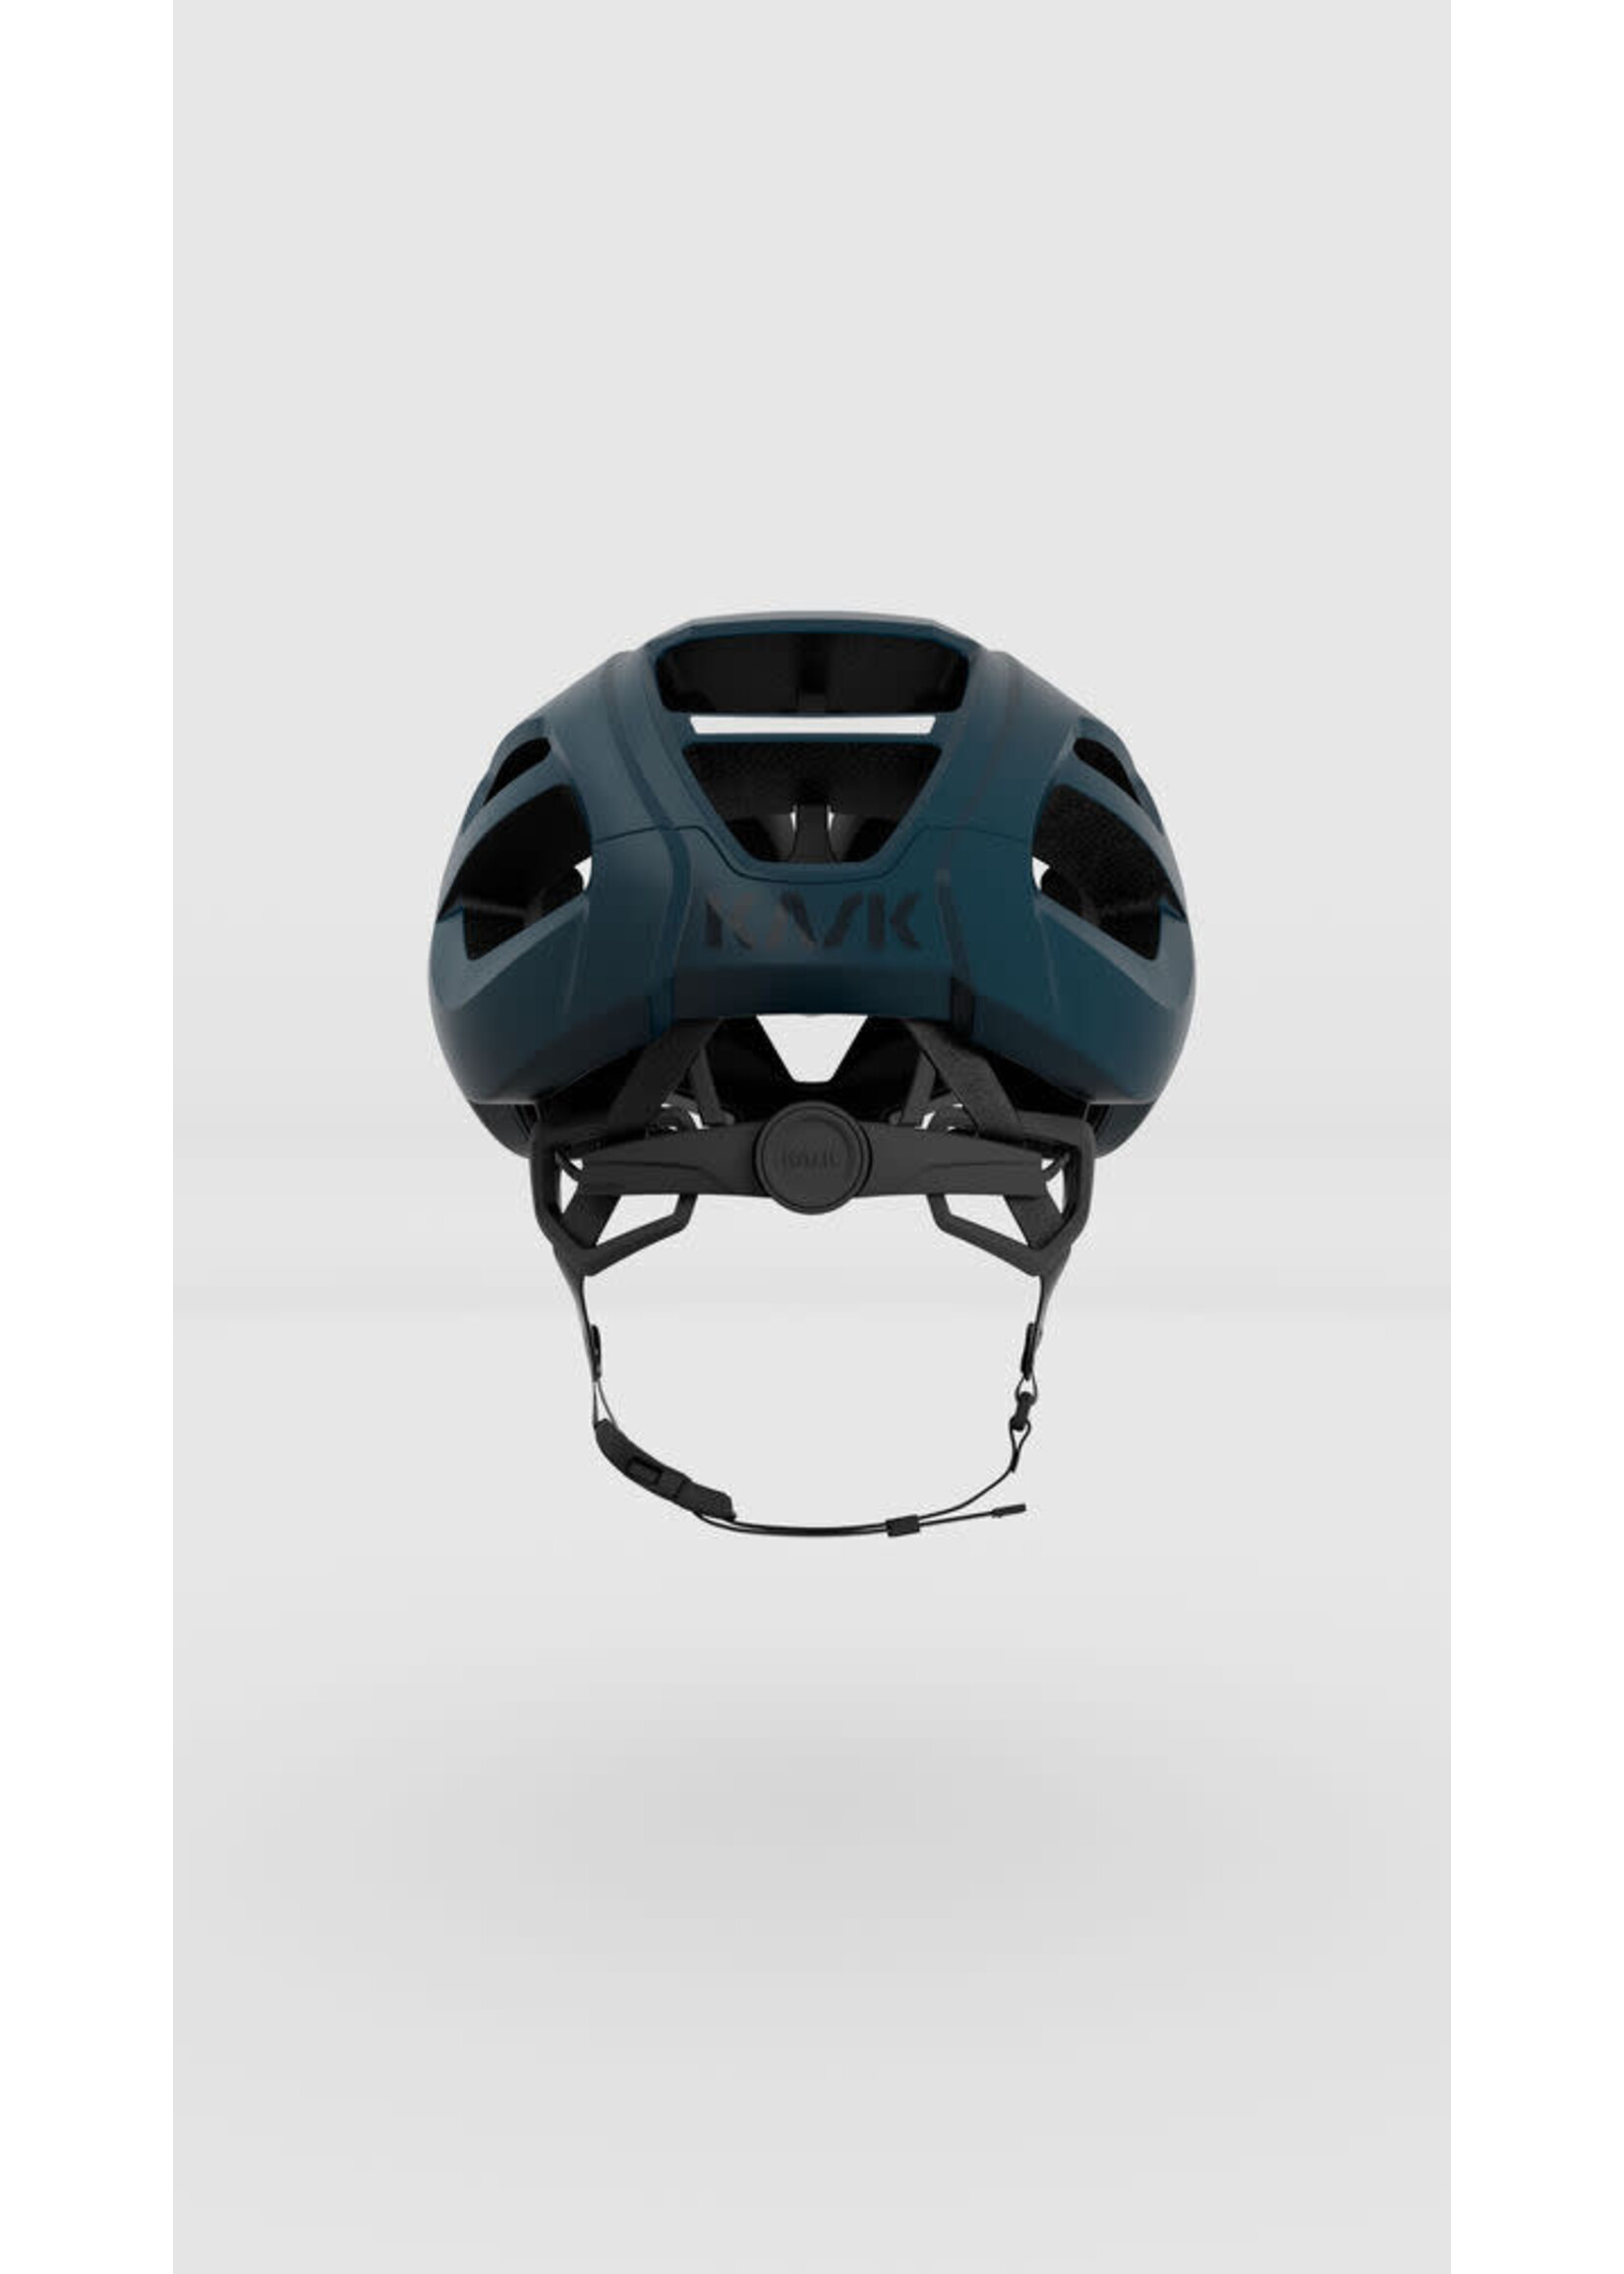 Kask KASK - Casque - Protone Icon - Vert foret